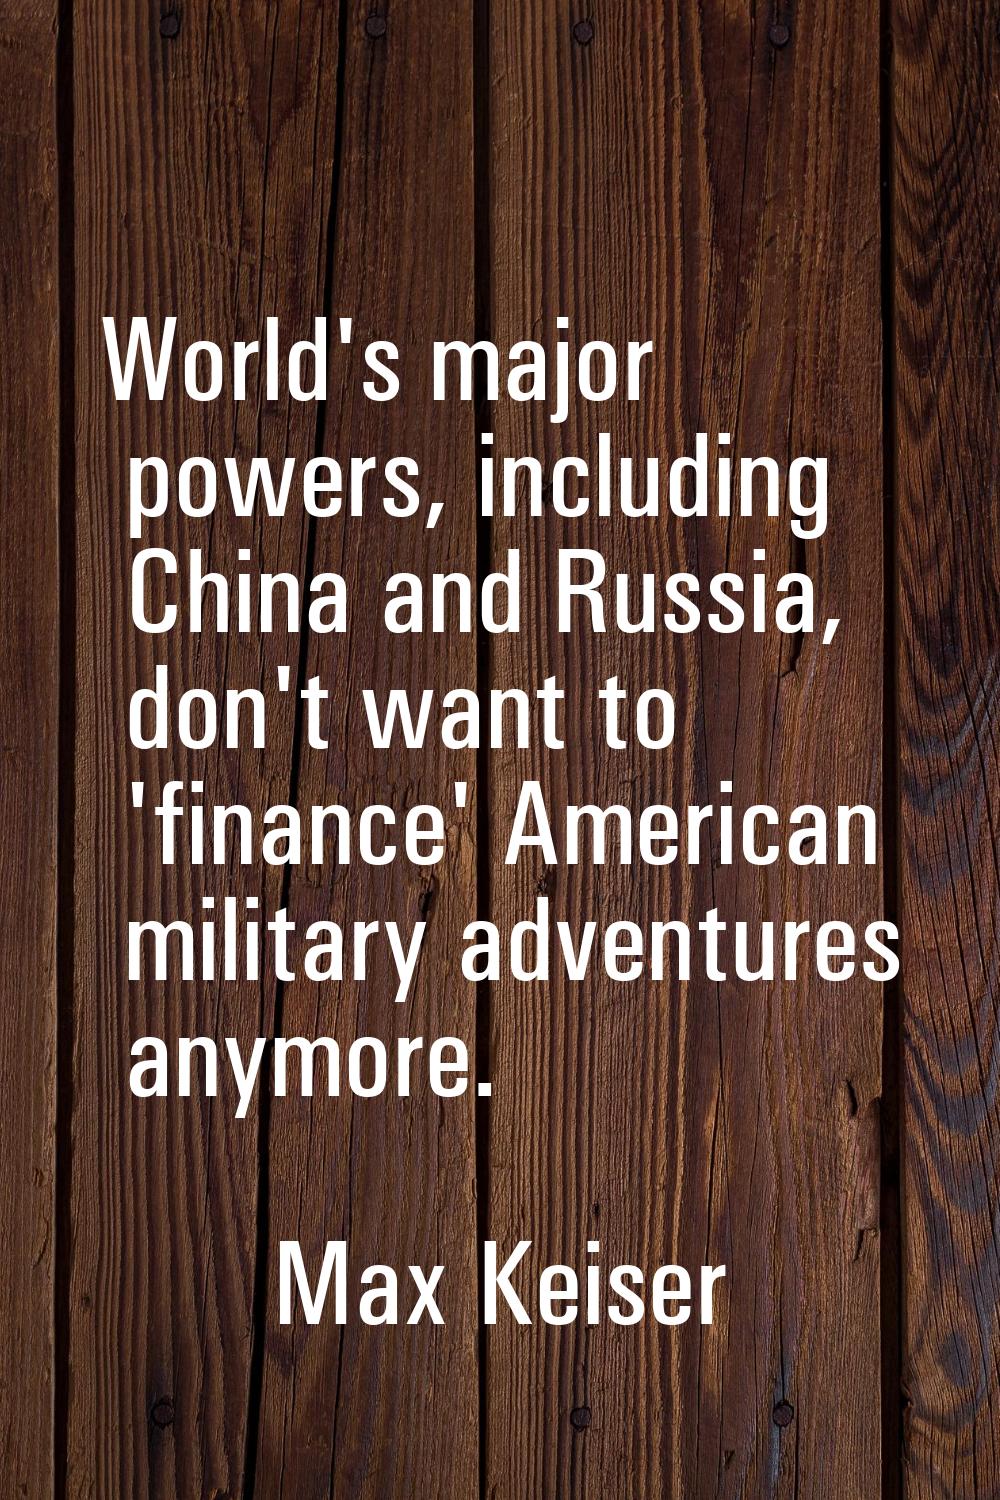 World's major powers, including China and Russia, don't want to 'finance' American military adventu